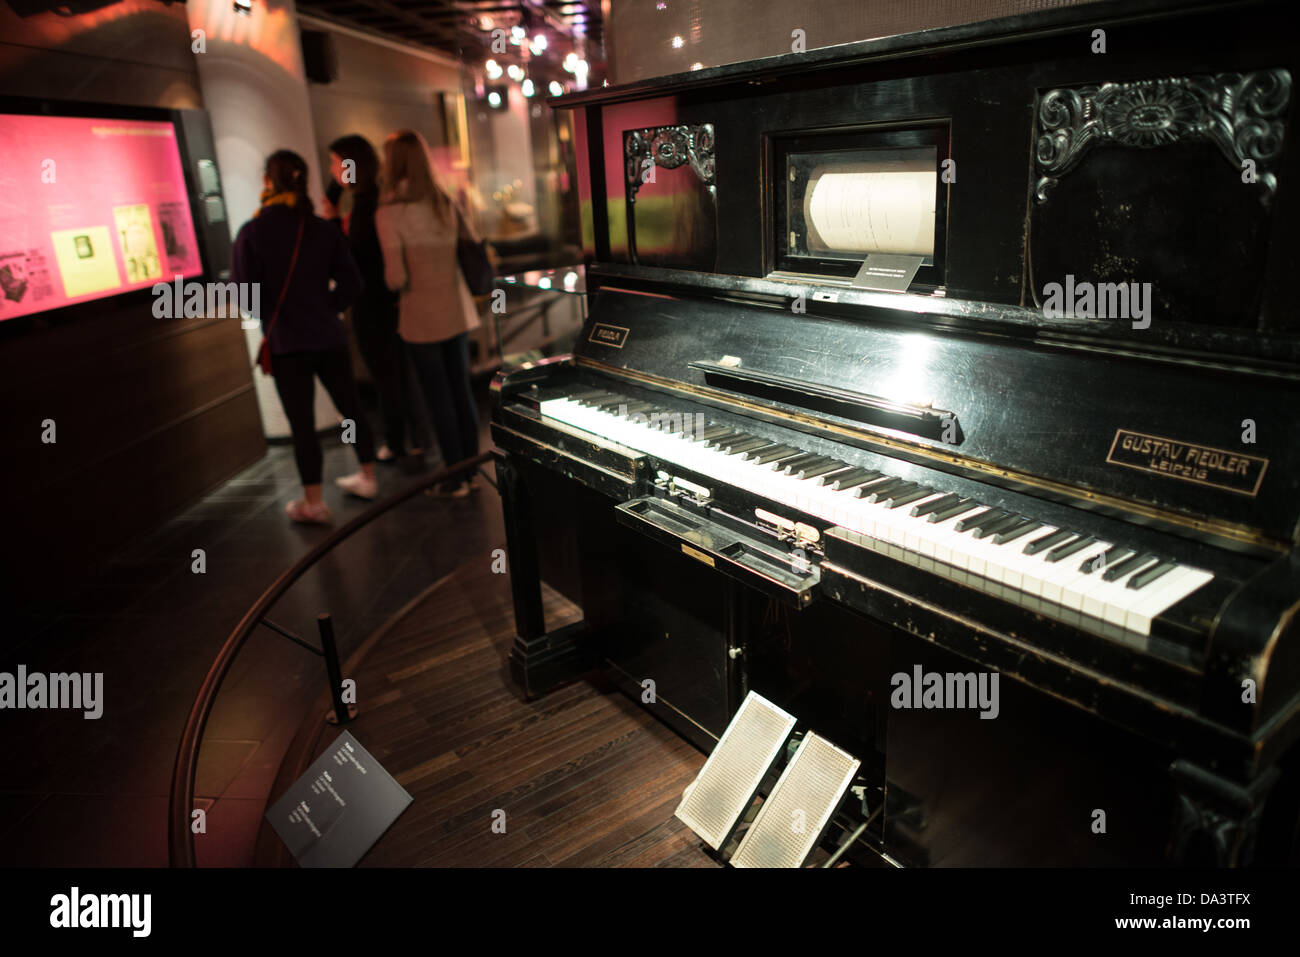 BRUSSELS, Belgium - A pianolo built in 1900 on display a the Musical Instrument Museum in Brussels. The Musee des Instruments de Musique (Musical Instrument Museum) in Brussels contains exhibits containing more than 2000 musical instruments. Displays include historical, exotic, and traditional cultural instruments from around the world. Visitors to the museum are given handheld audio guides that play musical demonstrations of many of the instruments. The museum is housed in the distinctive Old England Building. Stock Photo